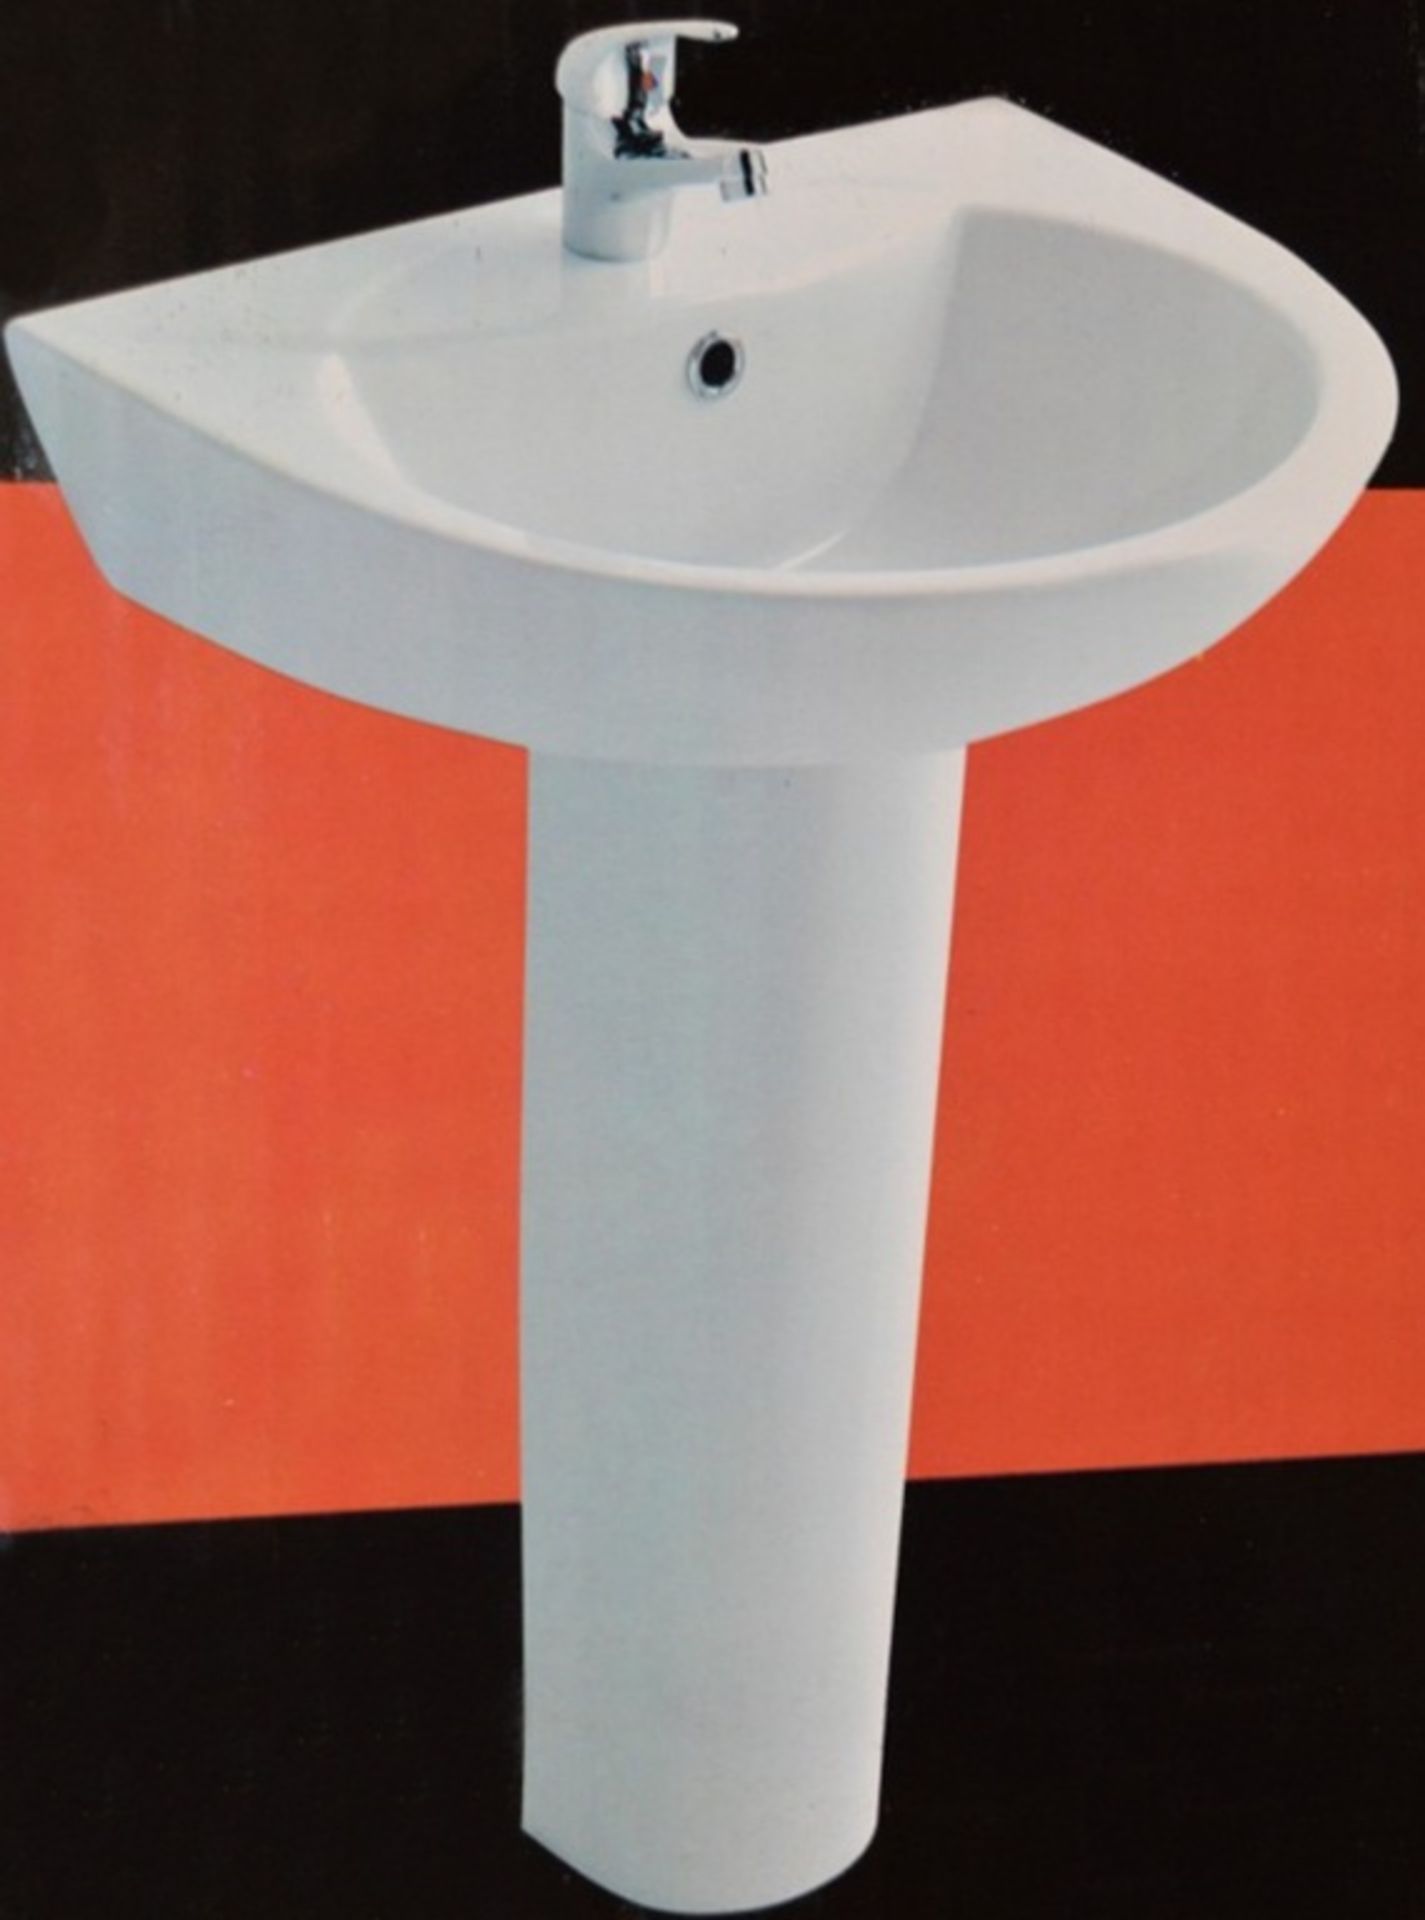 20 x Vogue Bathrooms ECO1 XPRESS Two Tap Hole SINK BASINS and Pedestals - 550mm Width - Brand New - Image 5 of 5